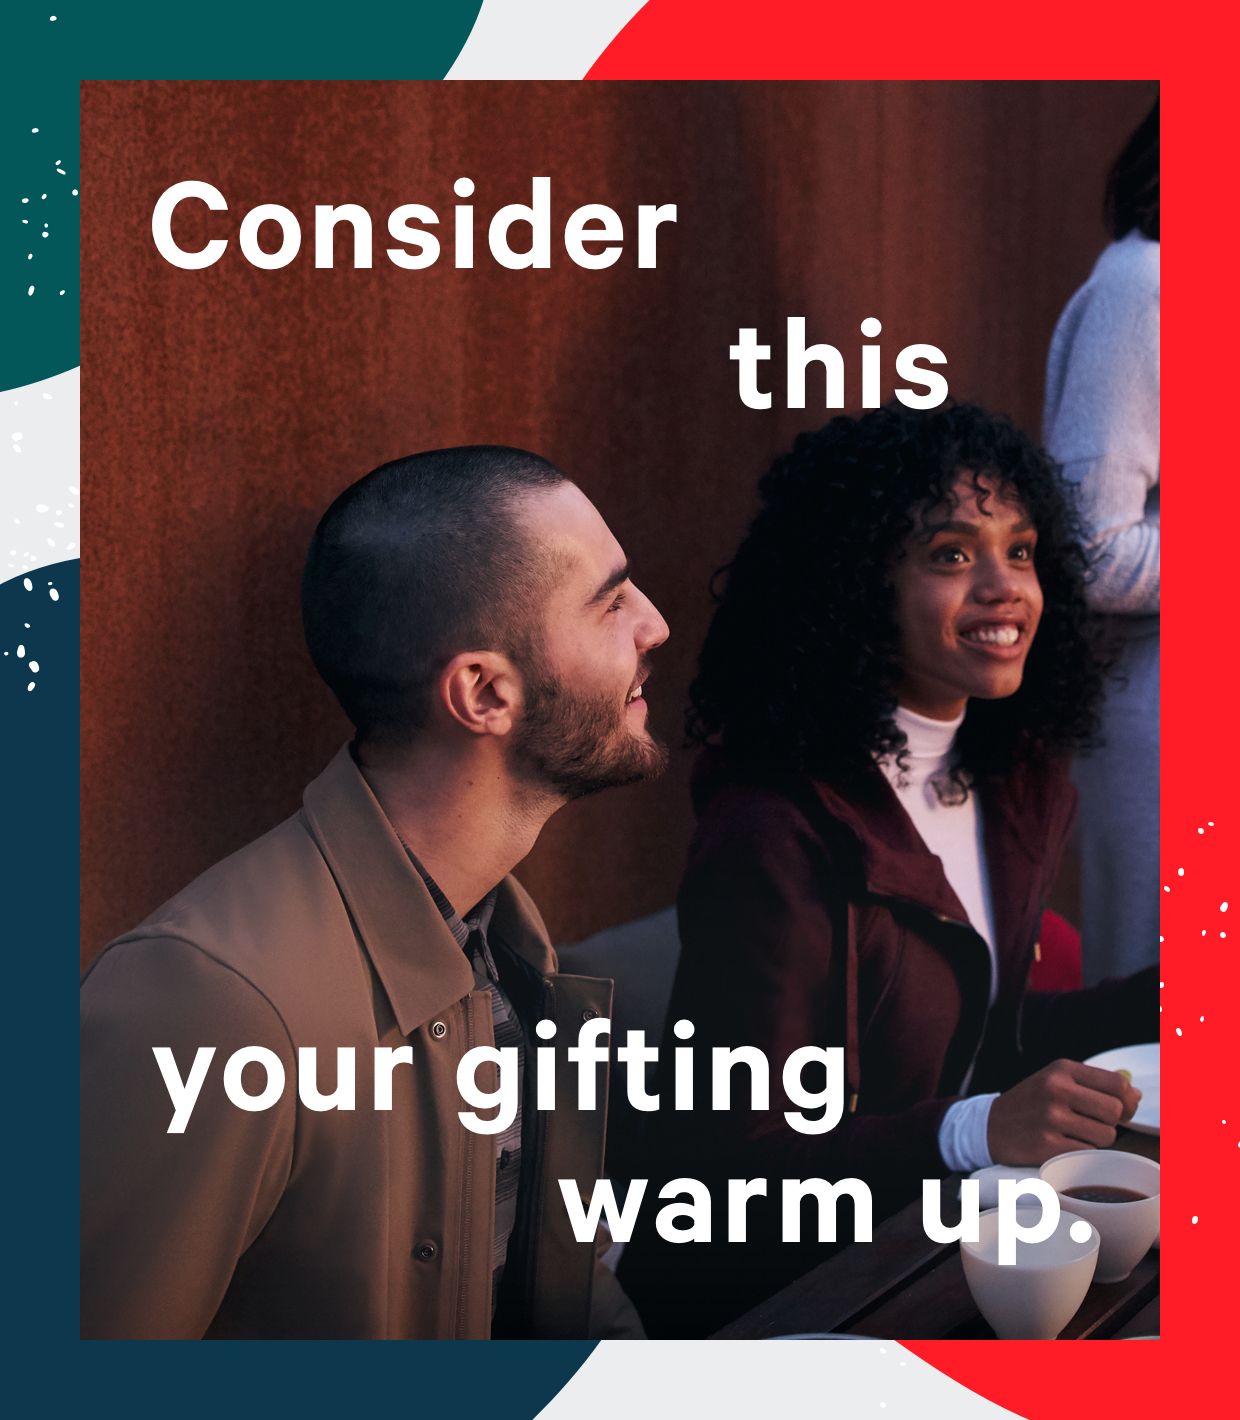 Consider this your gifting warm up.